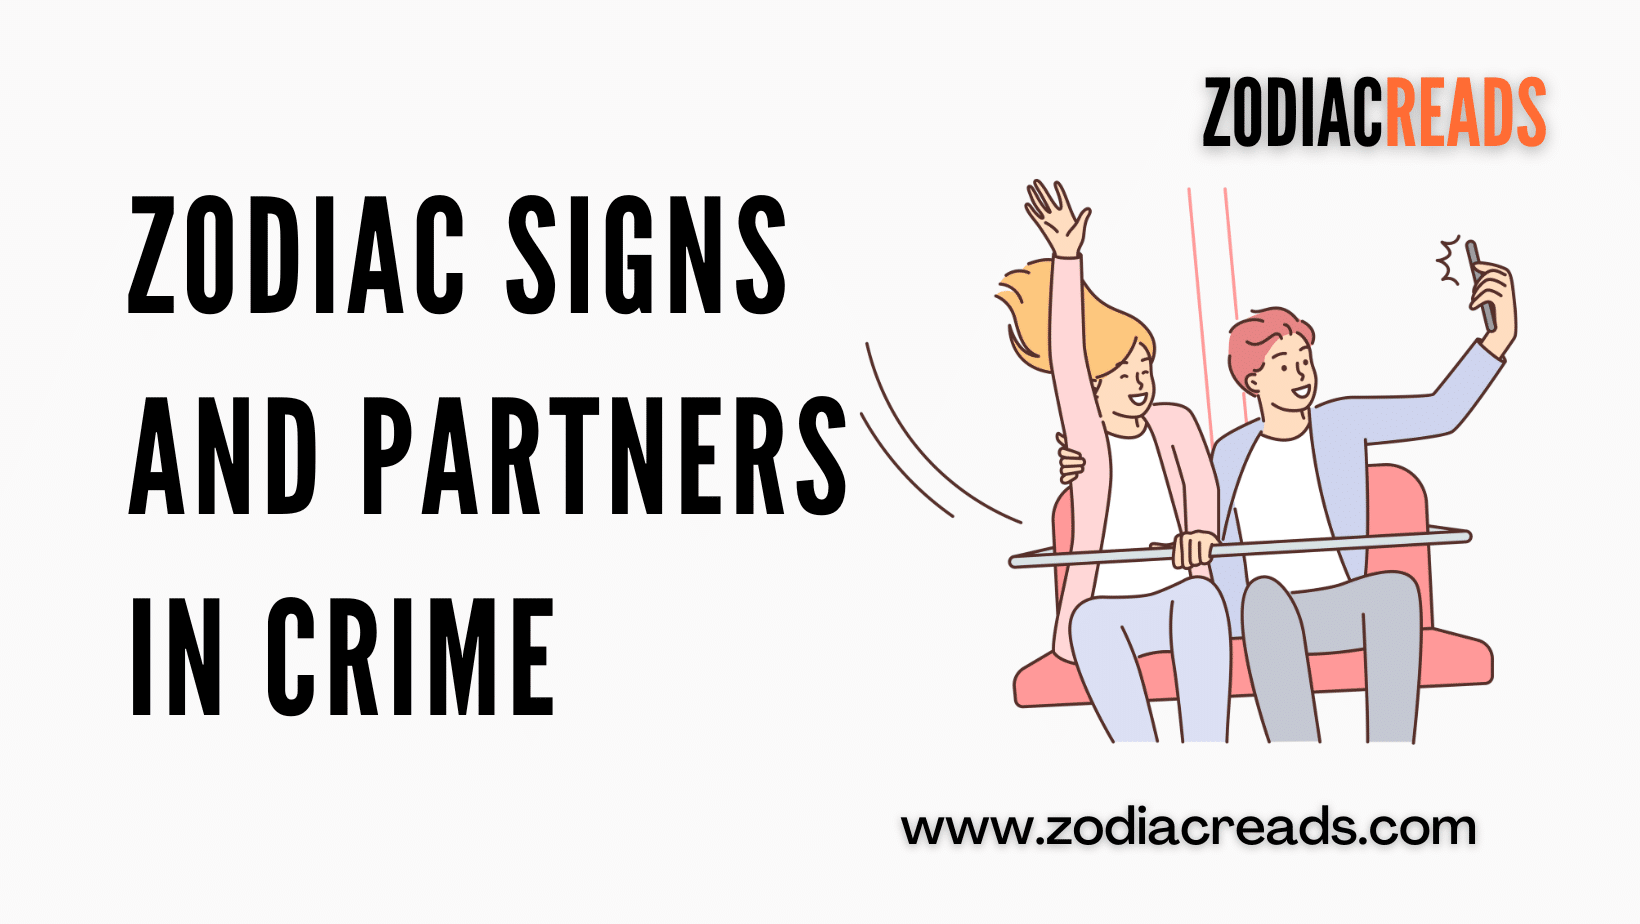 Zodiac Signs and Partner in Crime